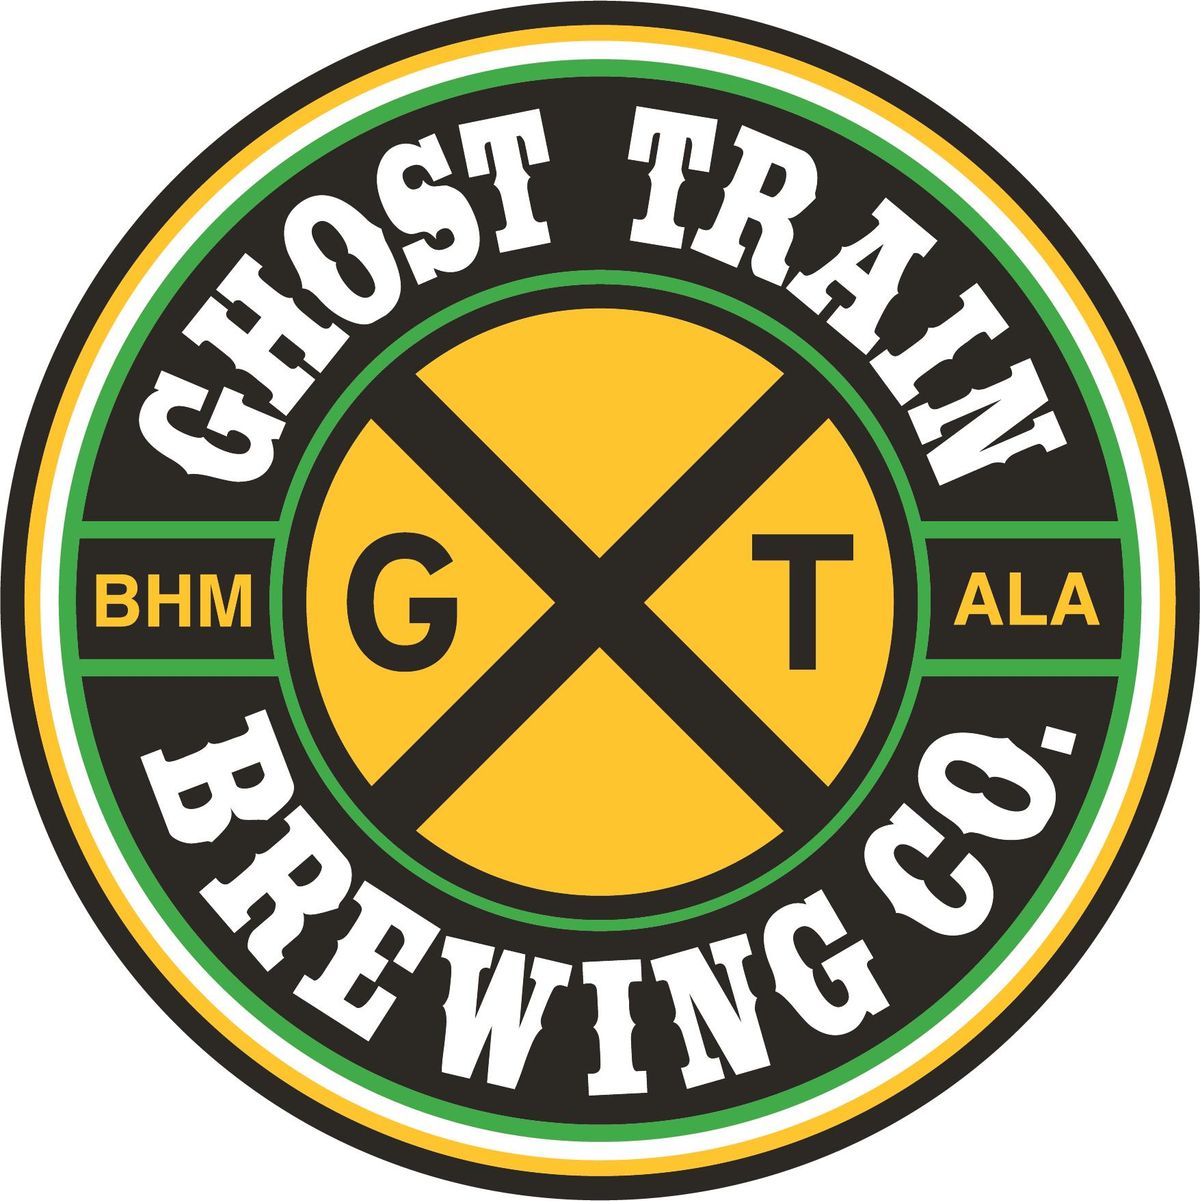 FREE EVENT presented by Ghost Train Brewing - Stand up comedy Open Mic presented by Comedy Break-in